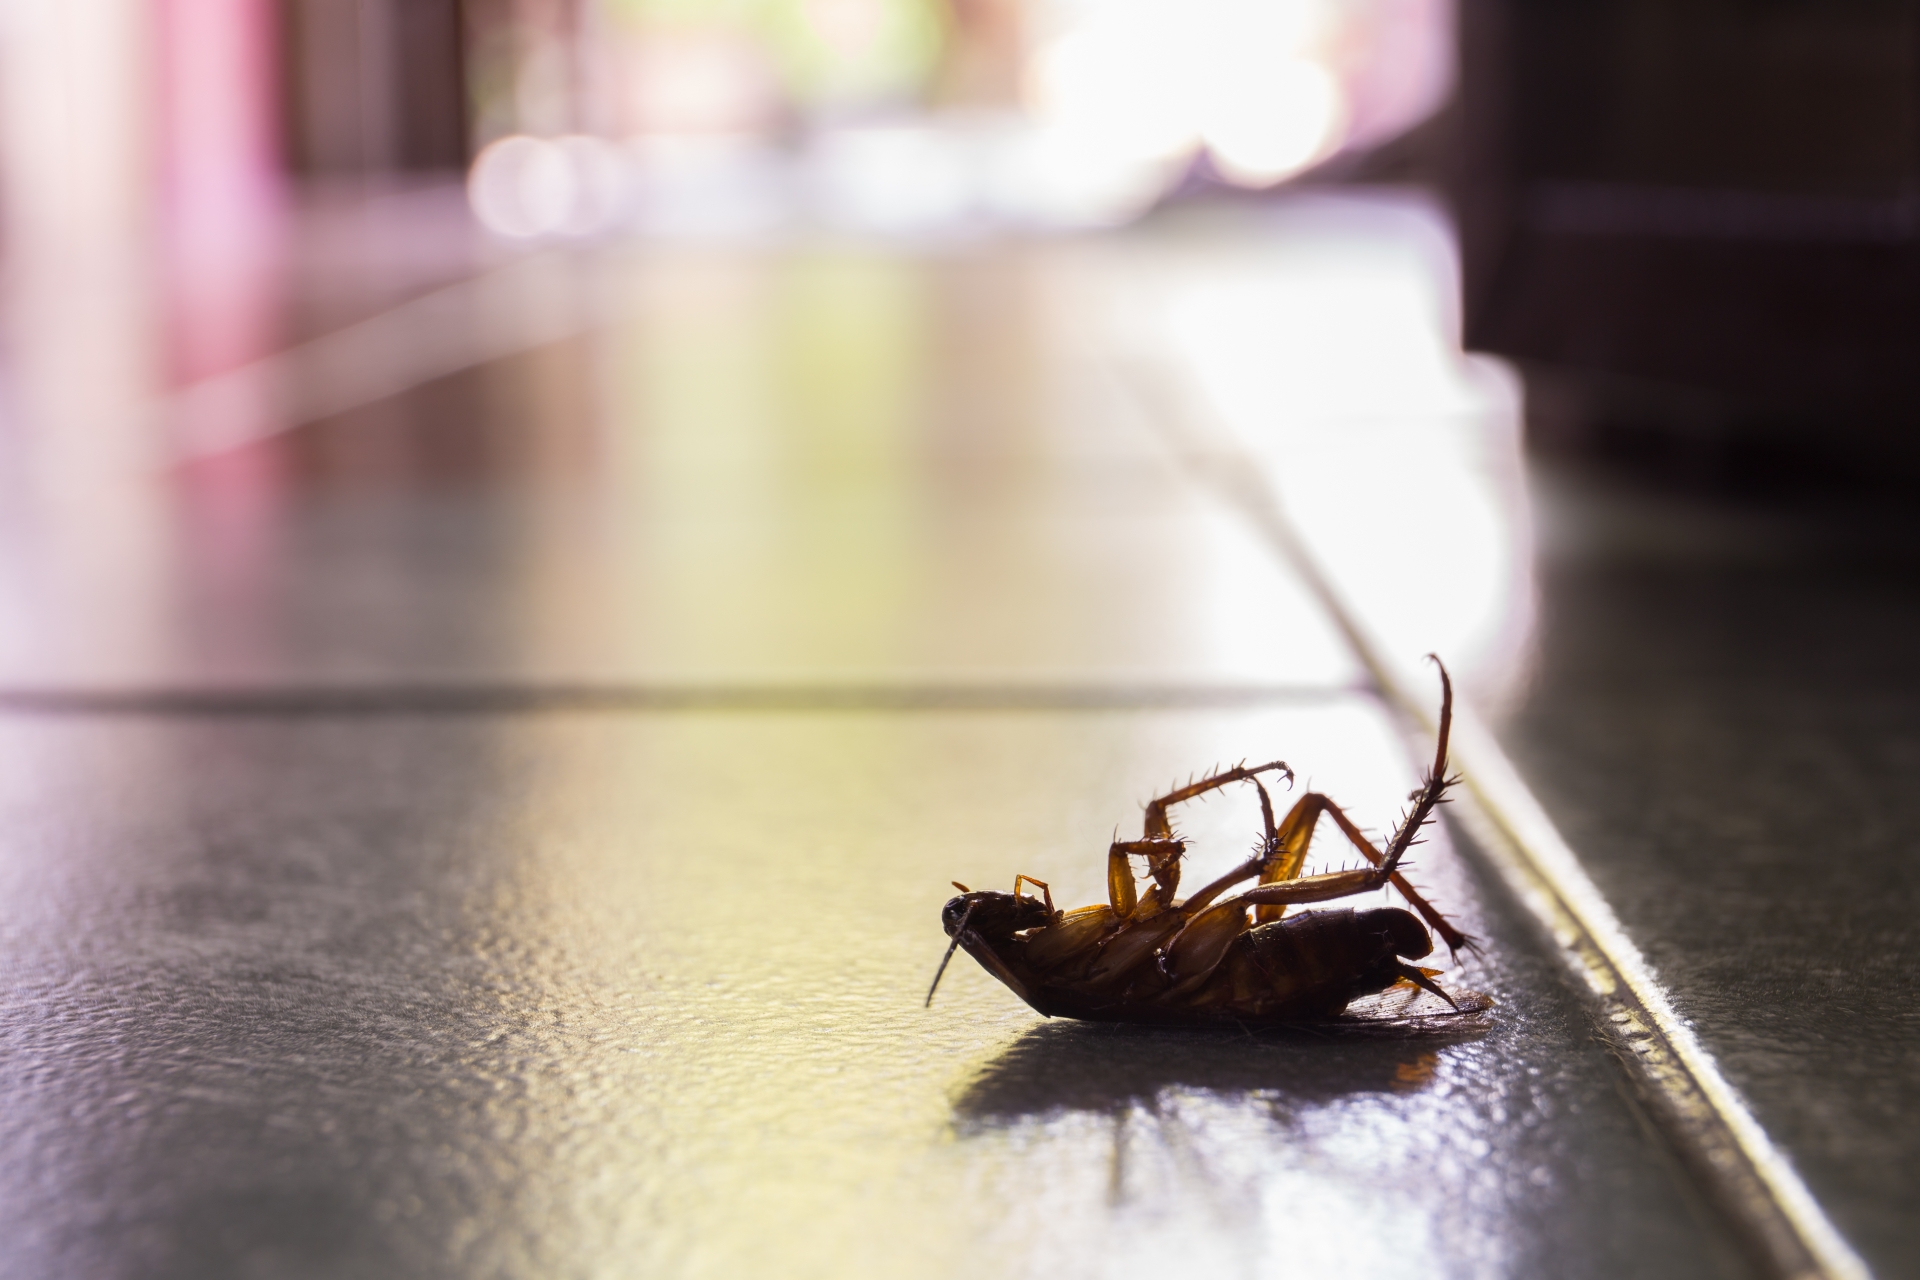 Cockroach Control, Pest Control in Chingford, Highams Park, E4. Call Now 020 8166 9746